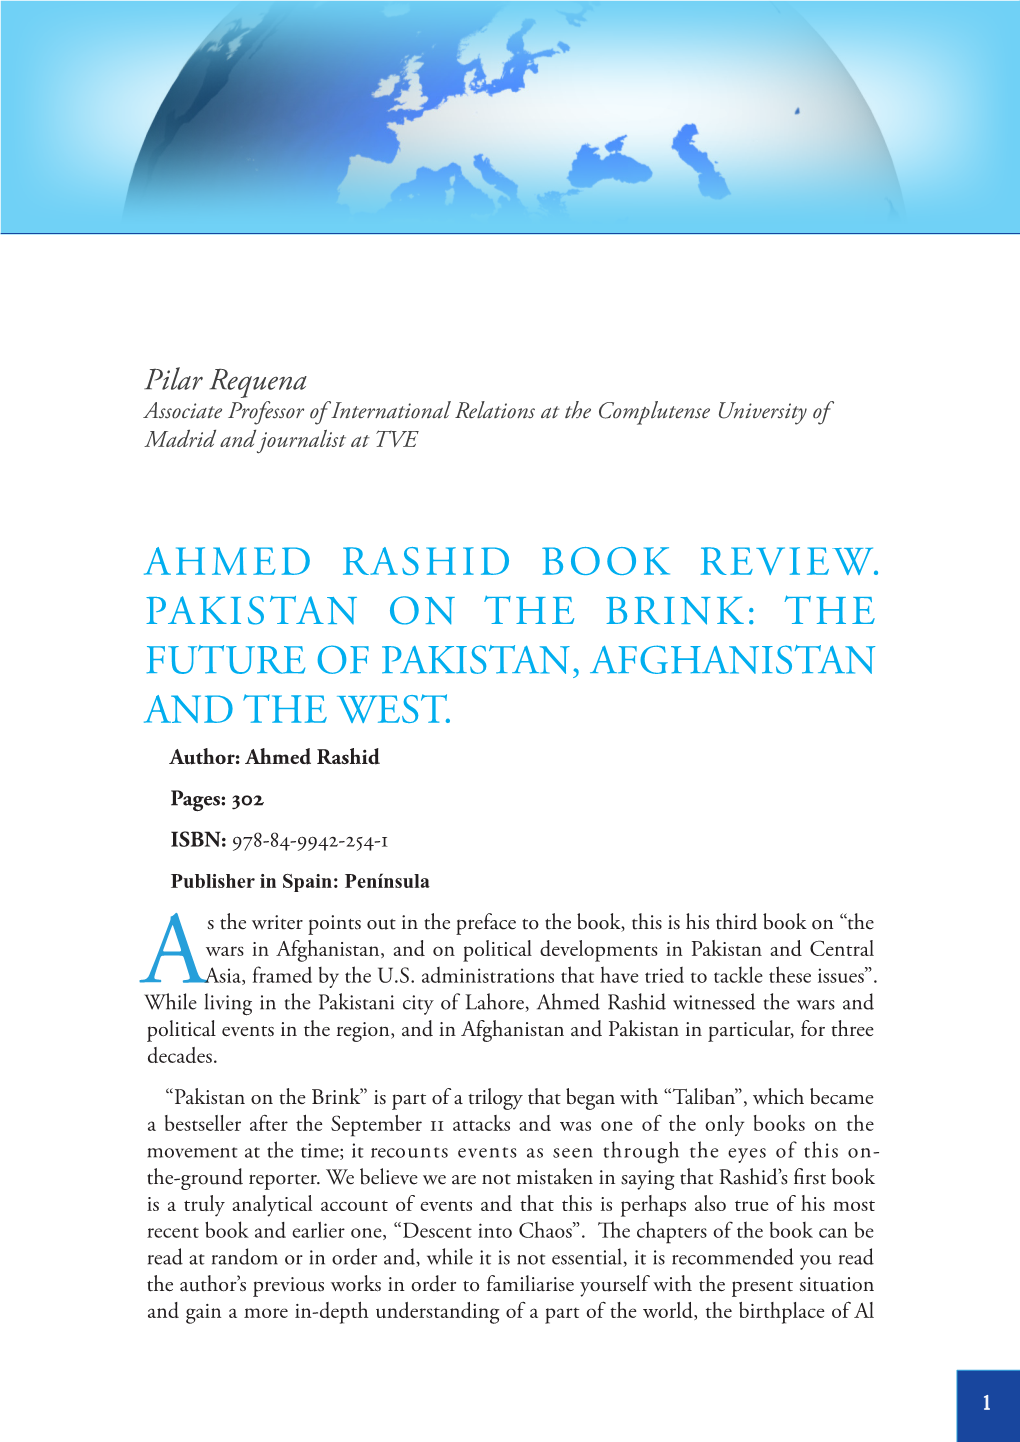 Ahmed Rashid Book Review. Pakistan on the Brink: the Future of Pakistan, Afghanistan and the West